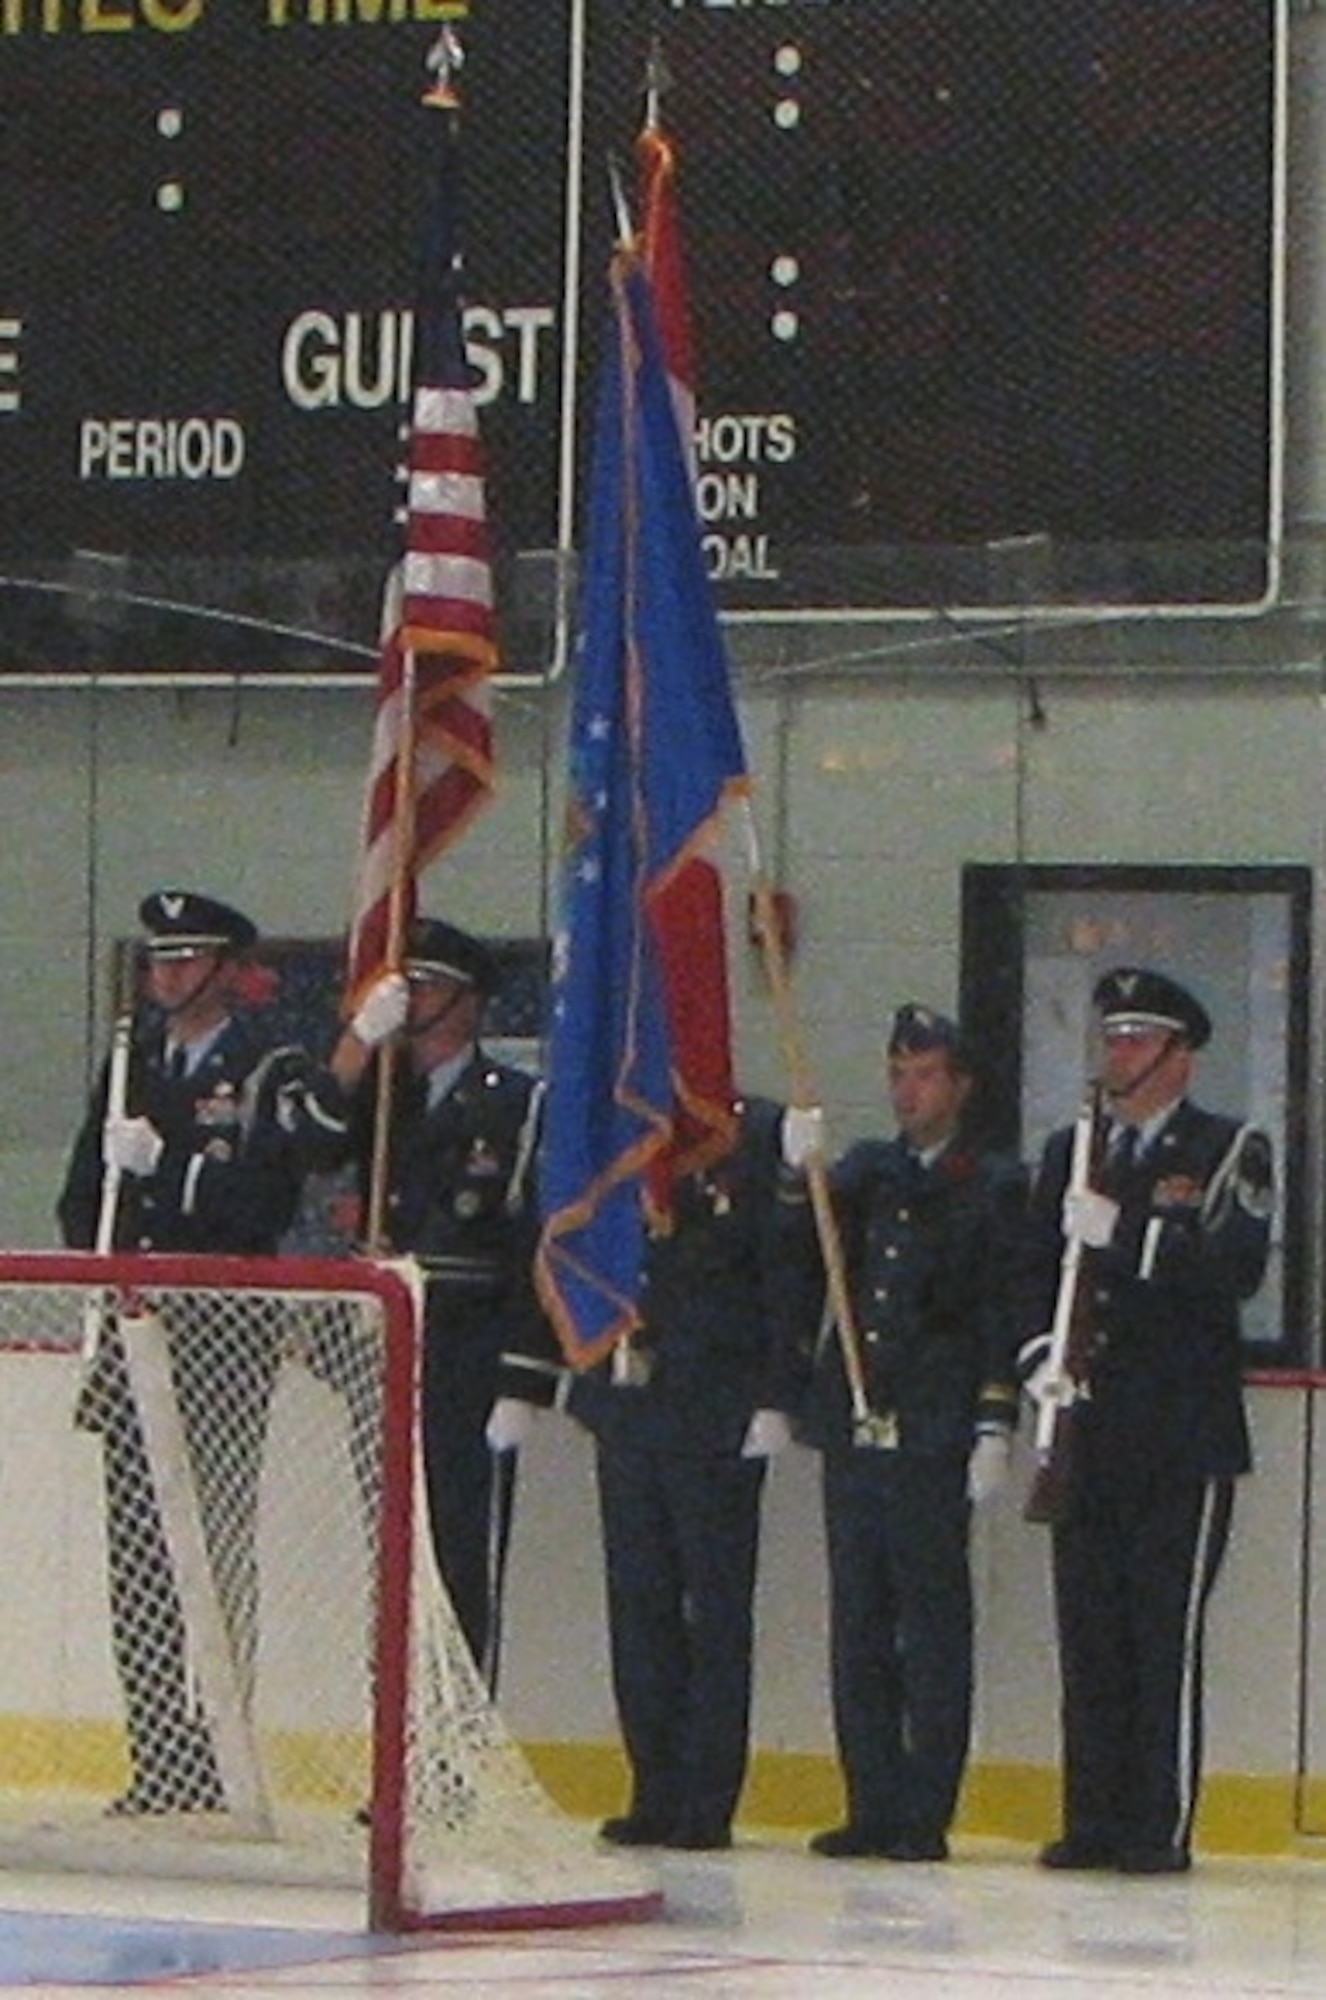 Eastern Air Defense Sector’s bi-national honor guard presented the American and Canadian colors Wednesday night at the Rome Frenzy’s home ice opener. From left to right, honor guard members are: Master Sergeant Thomas Whiteman, Master Sergeant Jeffrey LaMarche, Warrant Officer Duane Feltham, Canadian Forces; Lieutenant Jonathan Hillman, Canadian Forces; and Technical Sergeant James Mauthe. 